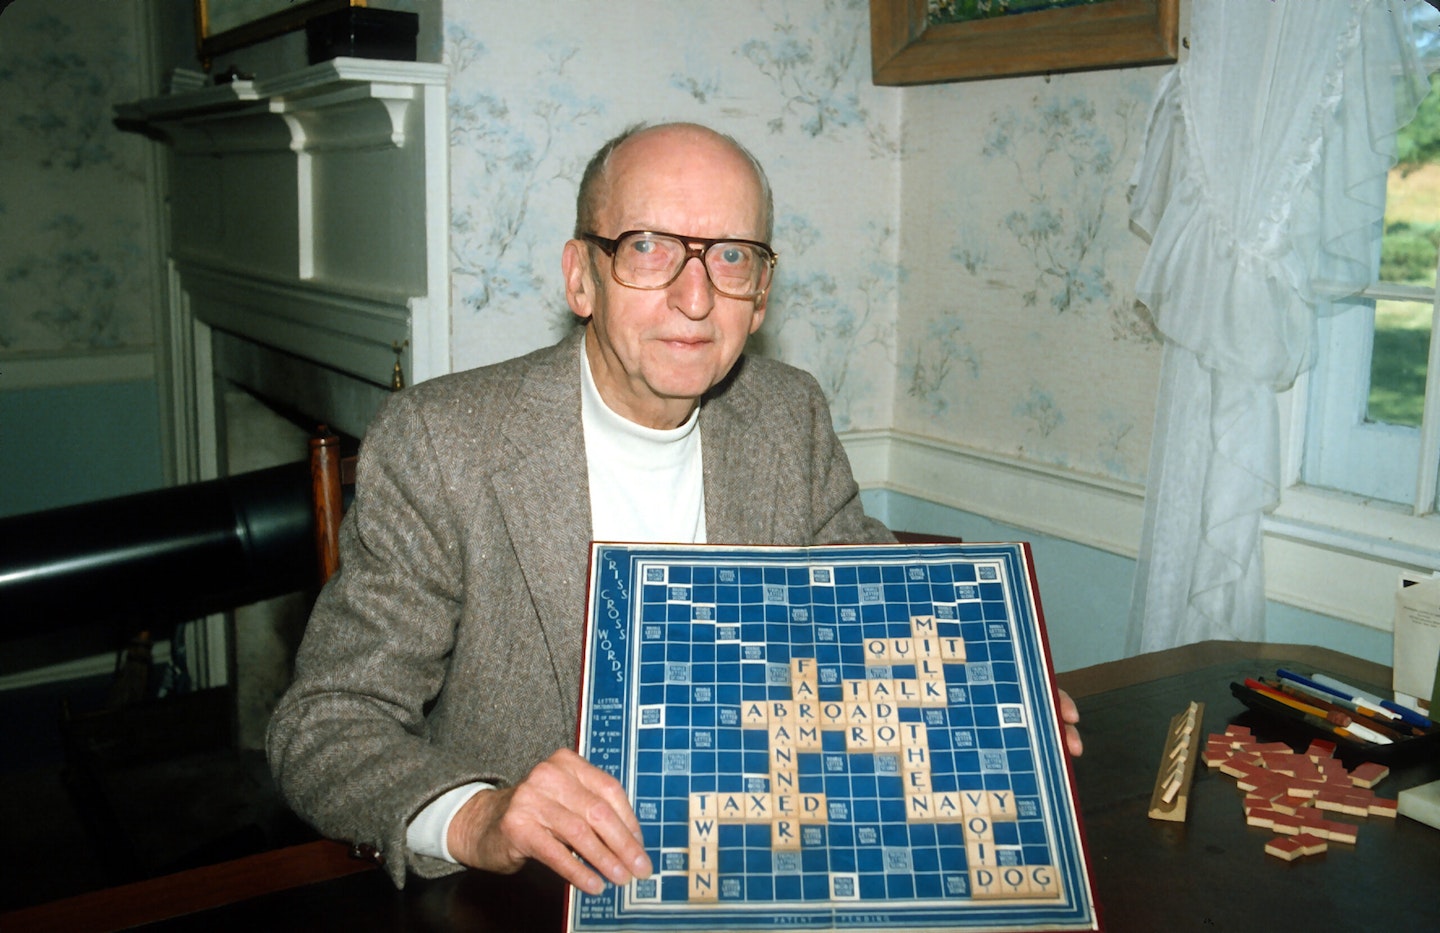 NEW YORK, NY - AUGUST 25: Alfred M. Butts, inventor of the board game 'Scrabble' is photographed August 25, 1981 in New York City. (Photo by Yvonne Hemsey/Getty Images